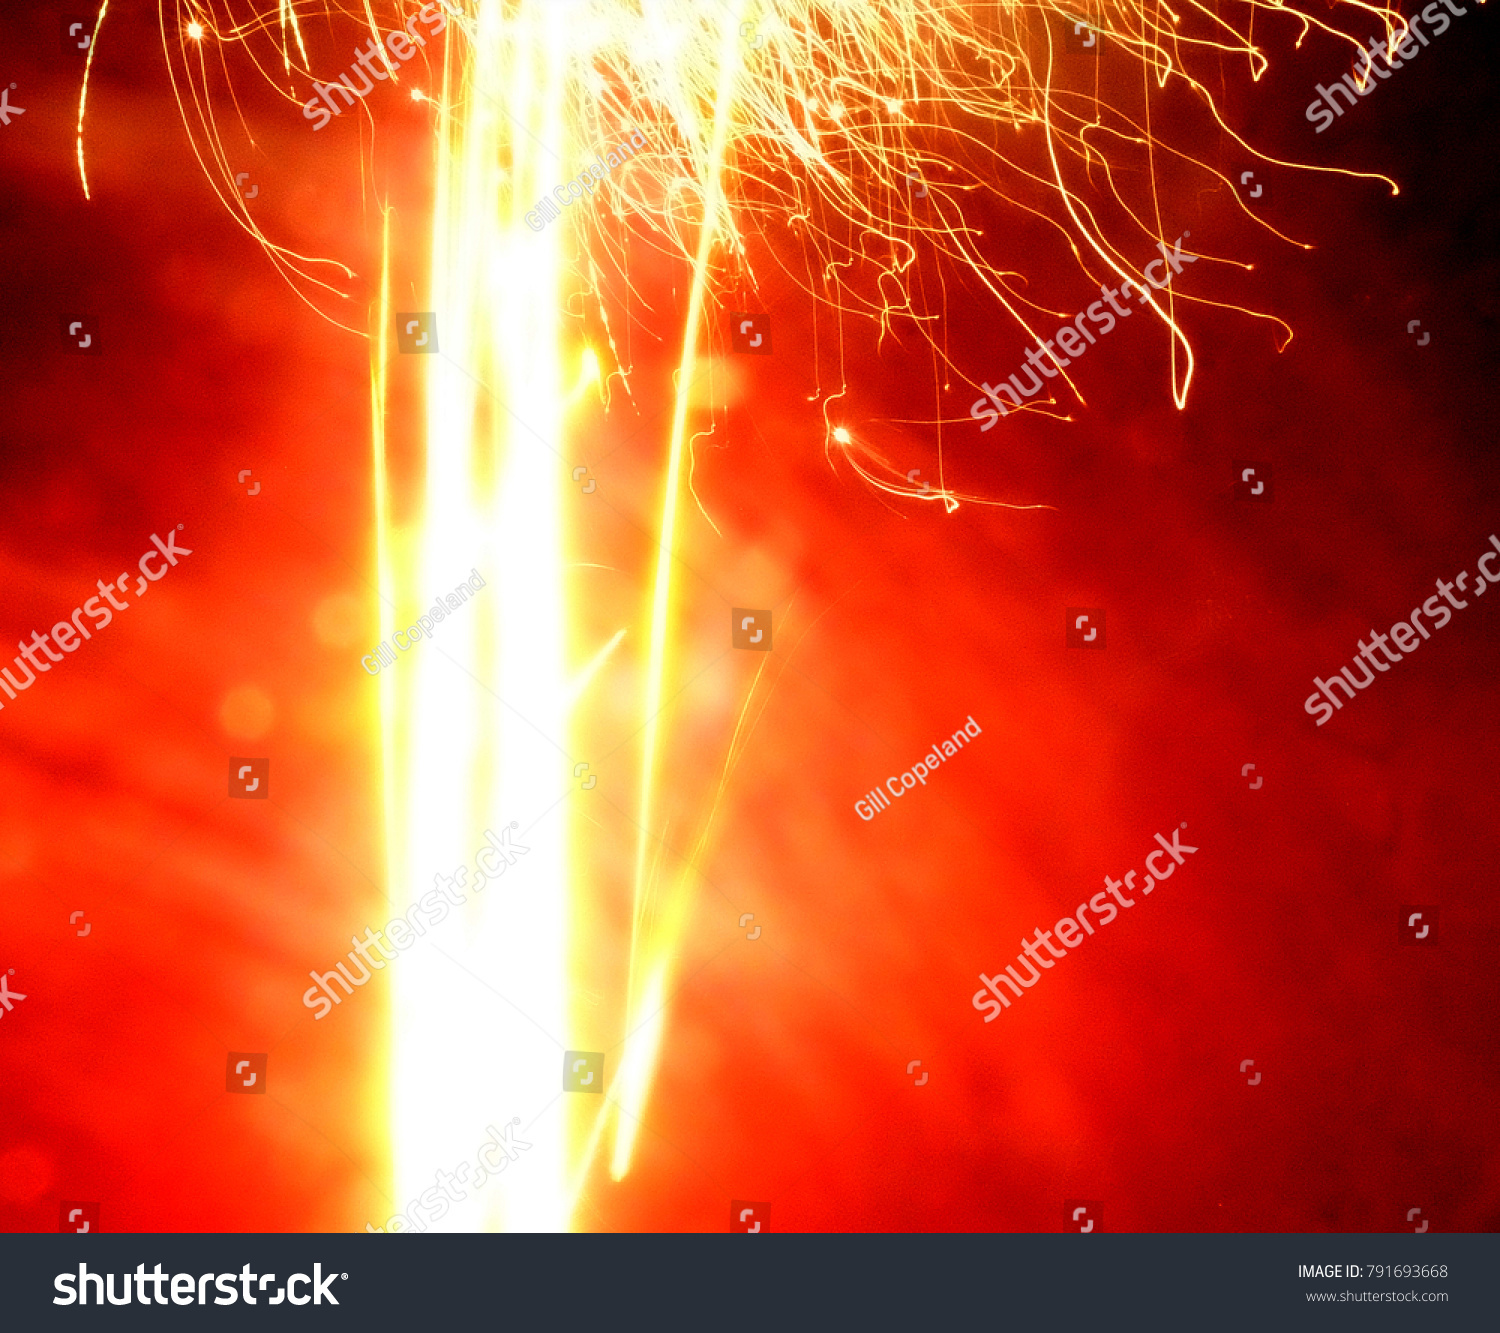 Abstract Yellow Red Light Trails Fire Stock Photo (Royalty Free ...